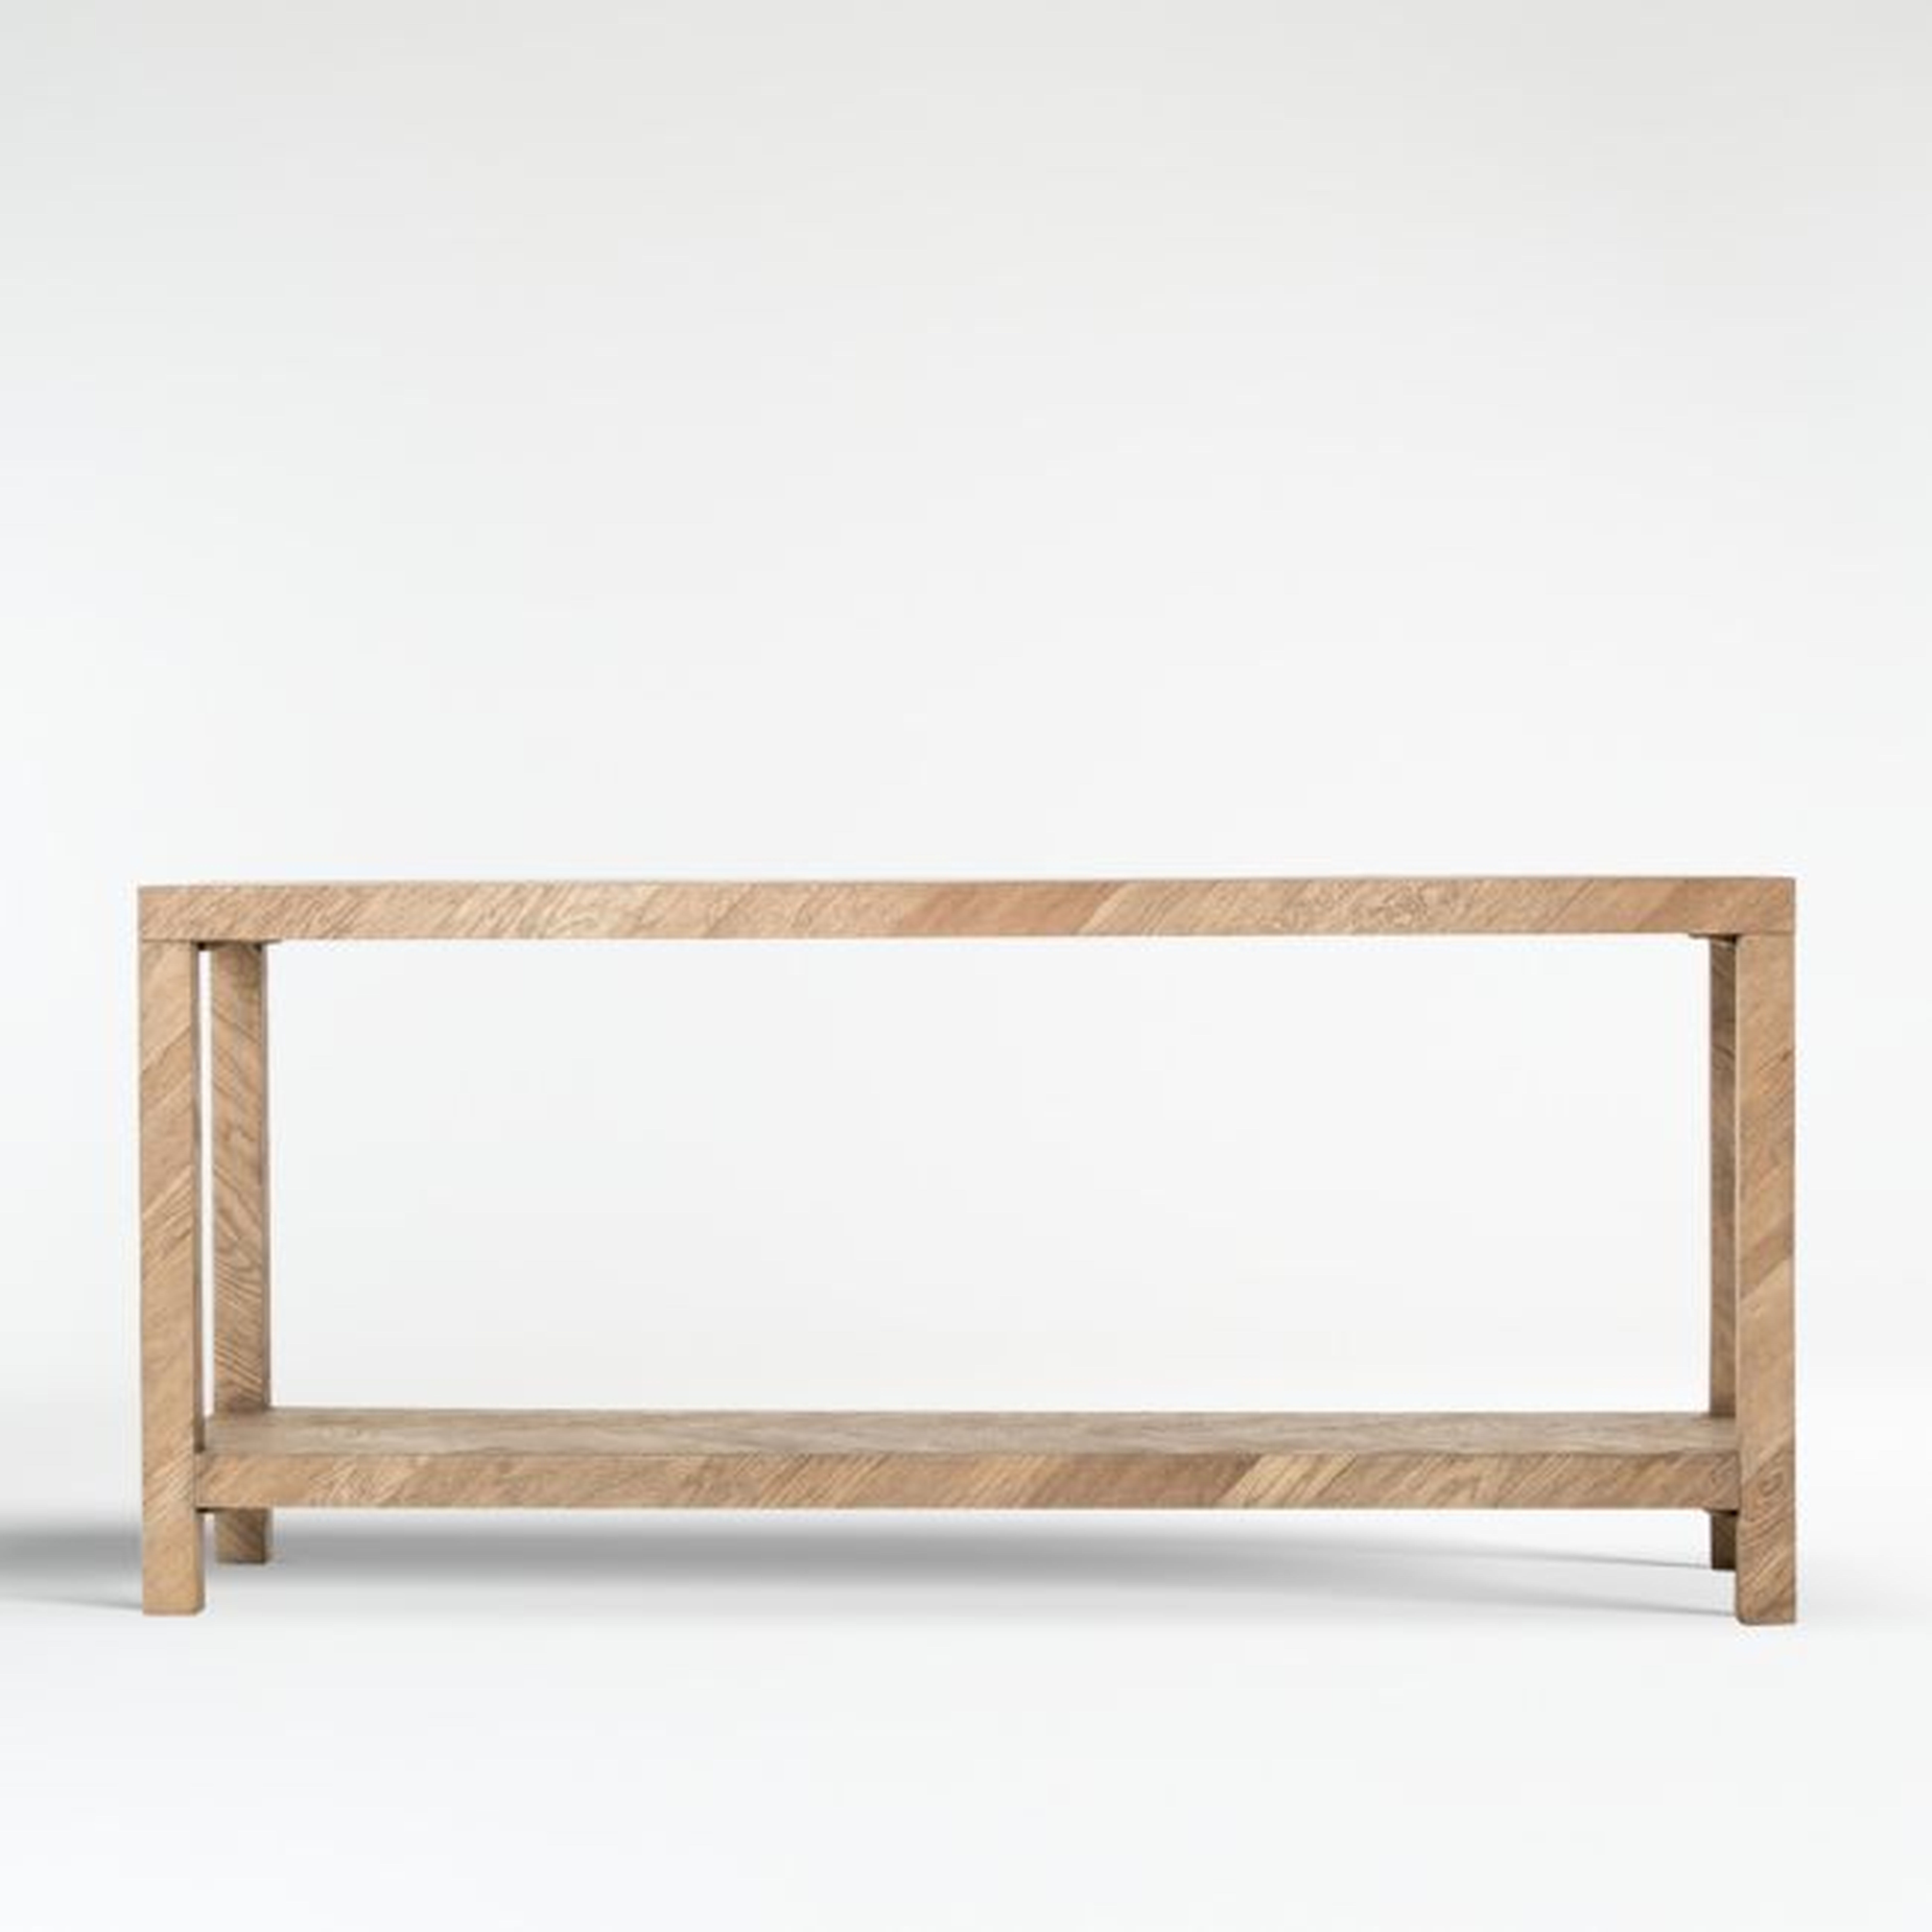 Chamberlain Console Table - Crate and Barrel